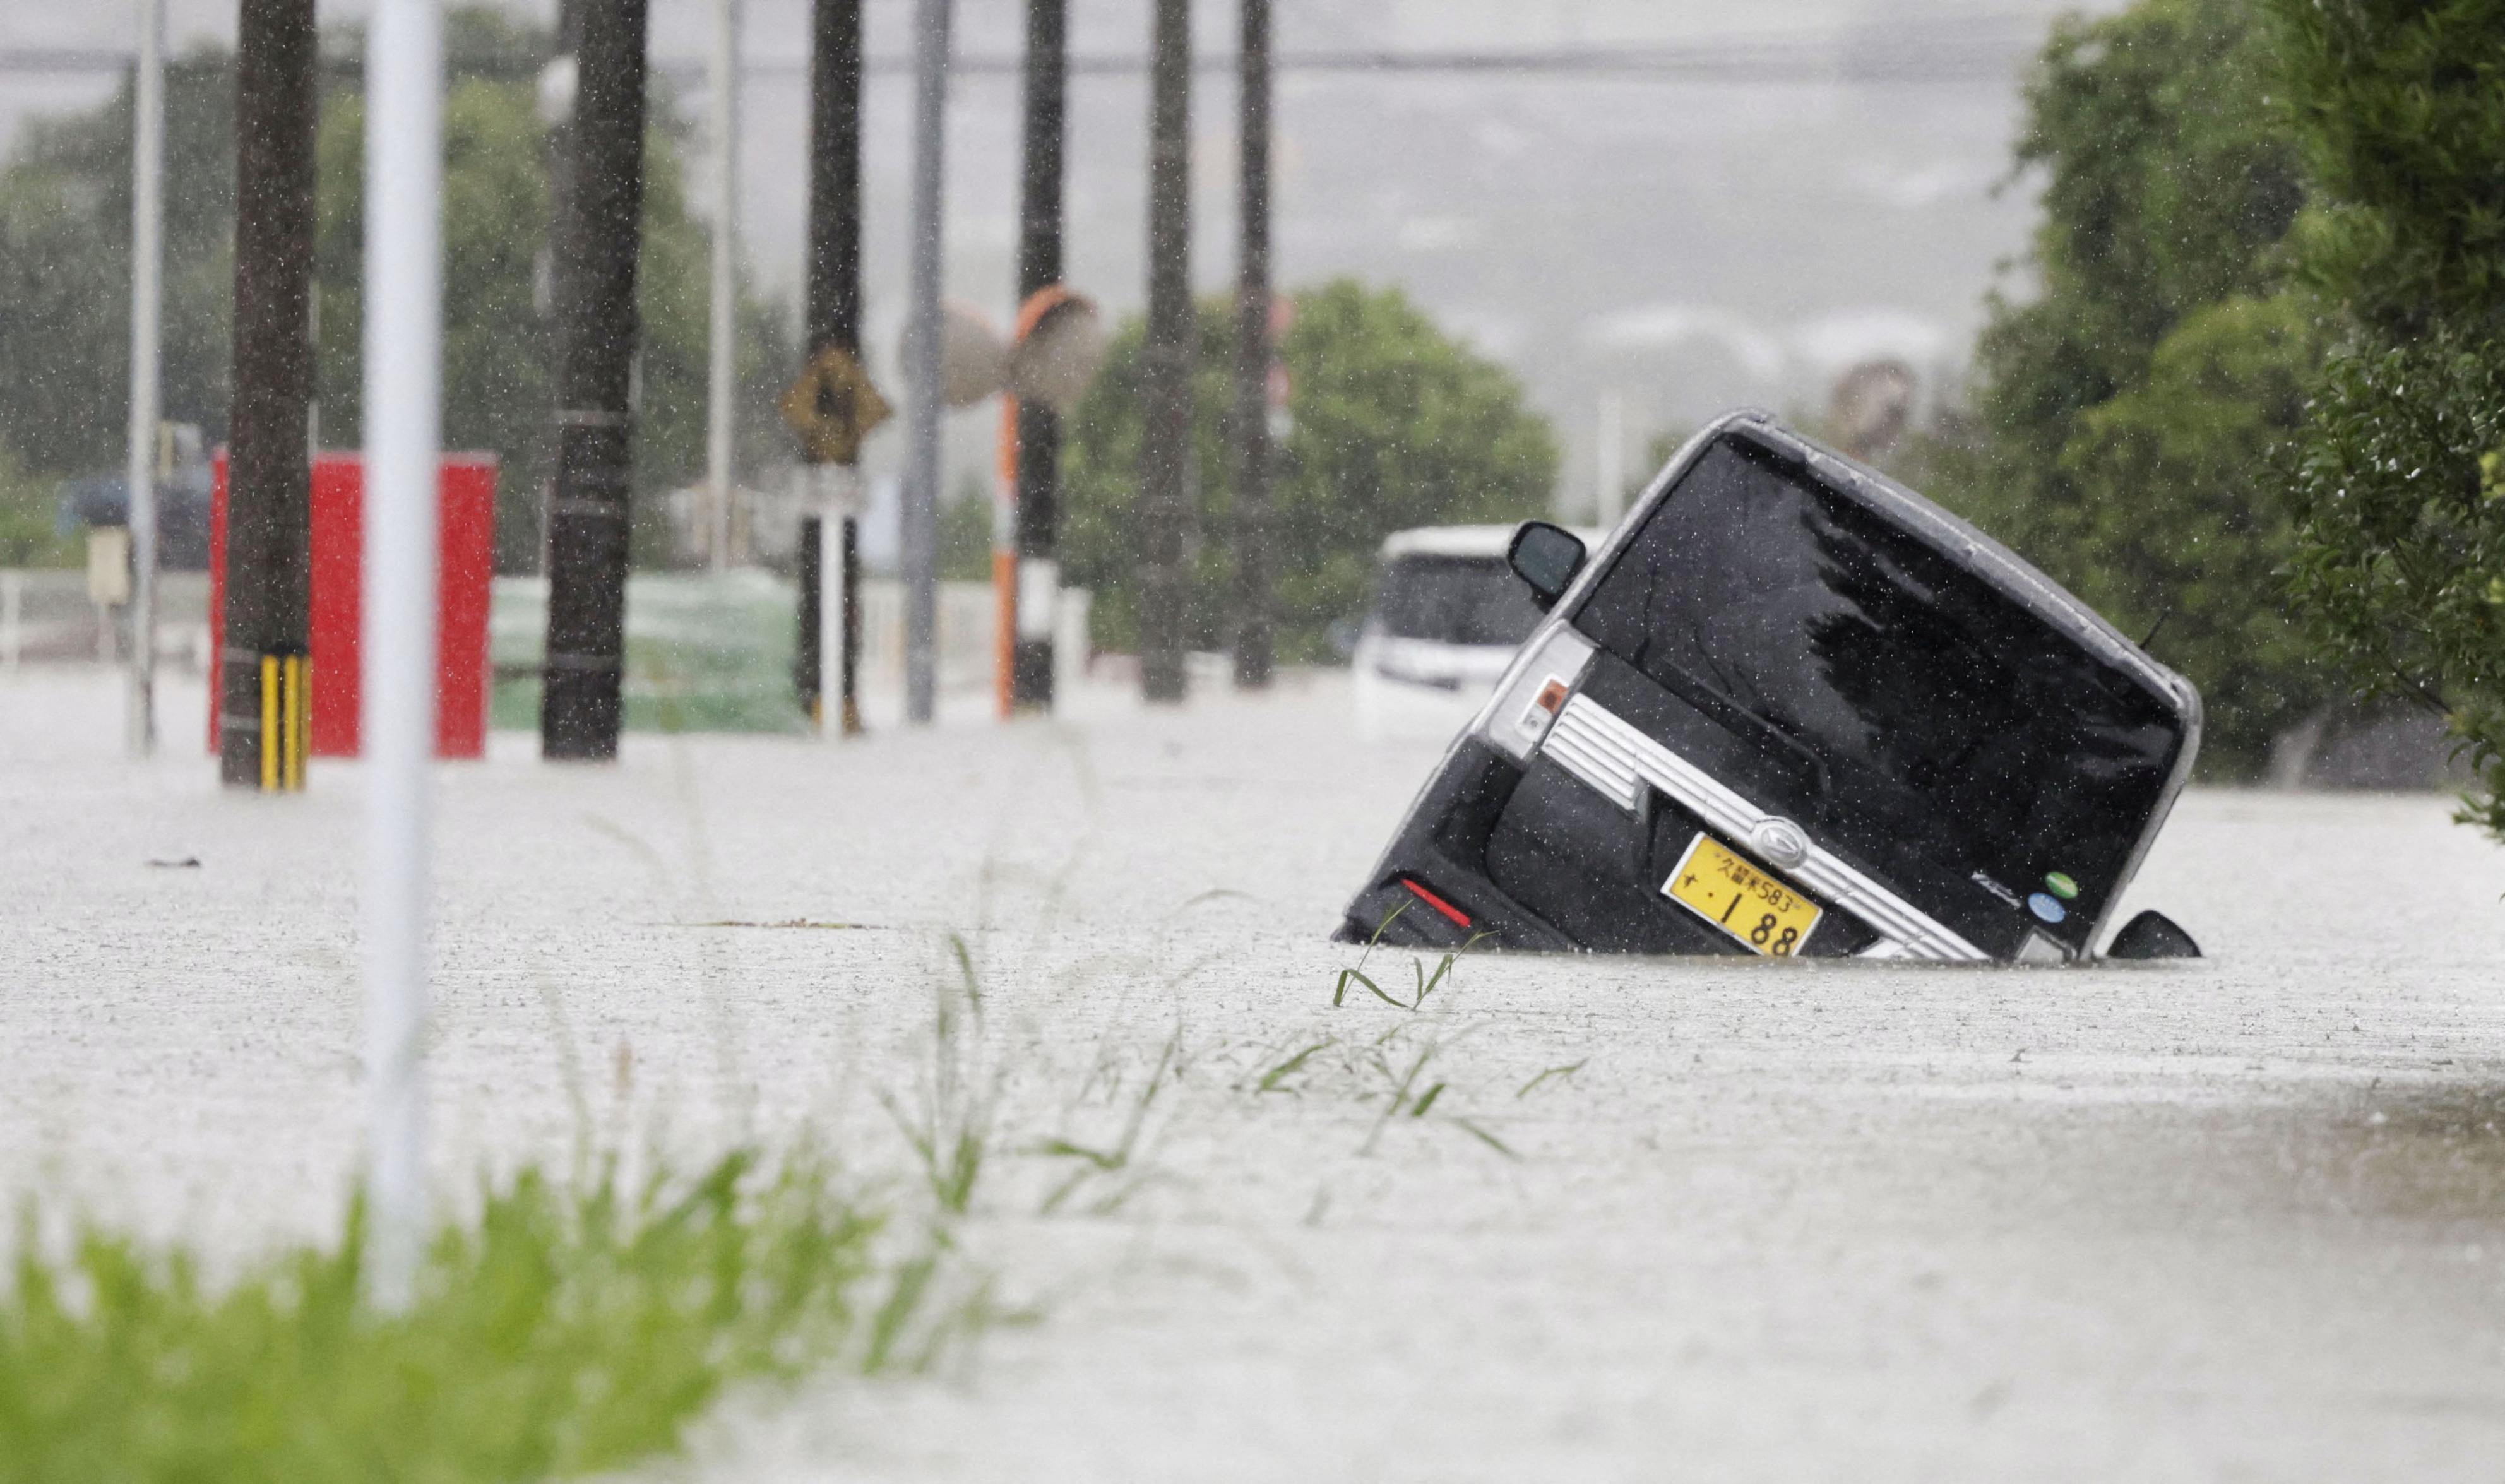 Cars are stranded in a flooded road in heavy rain in Kurume